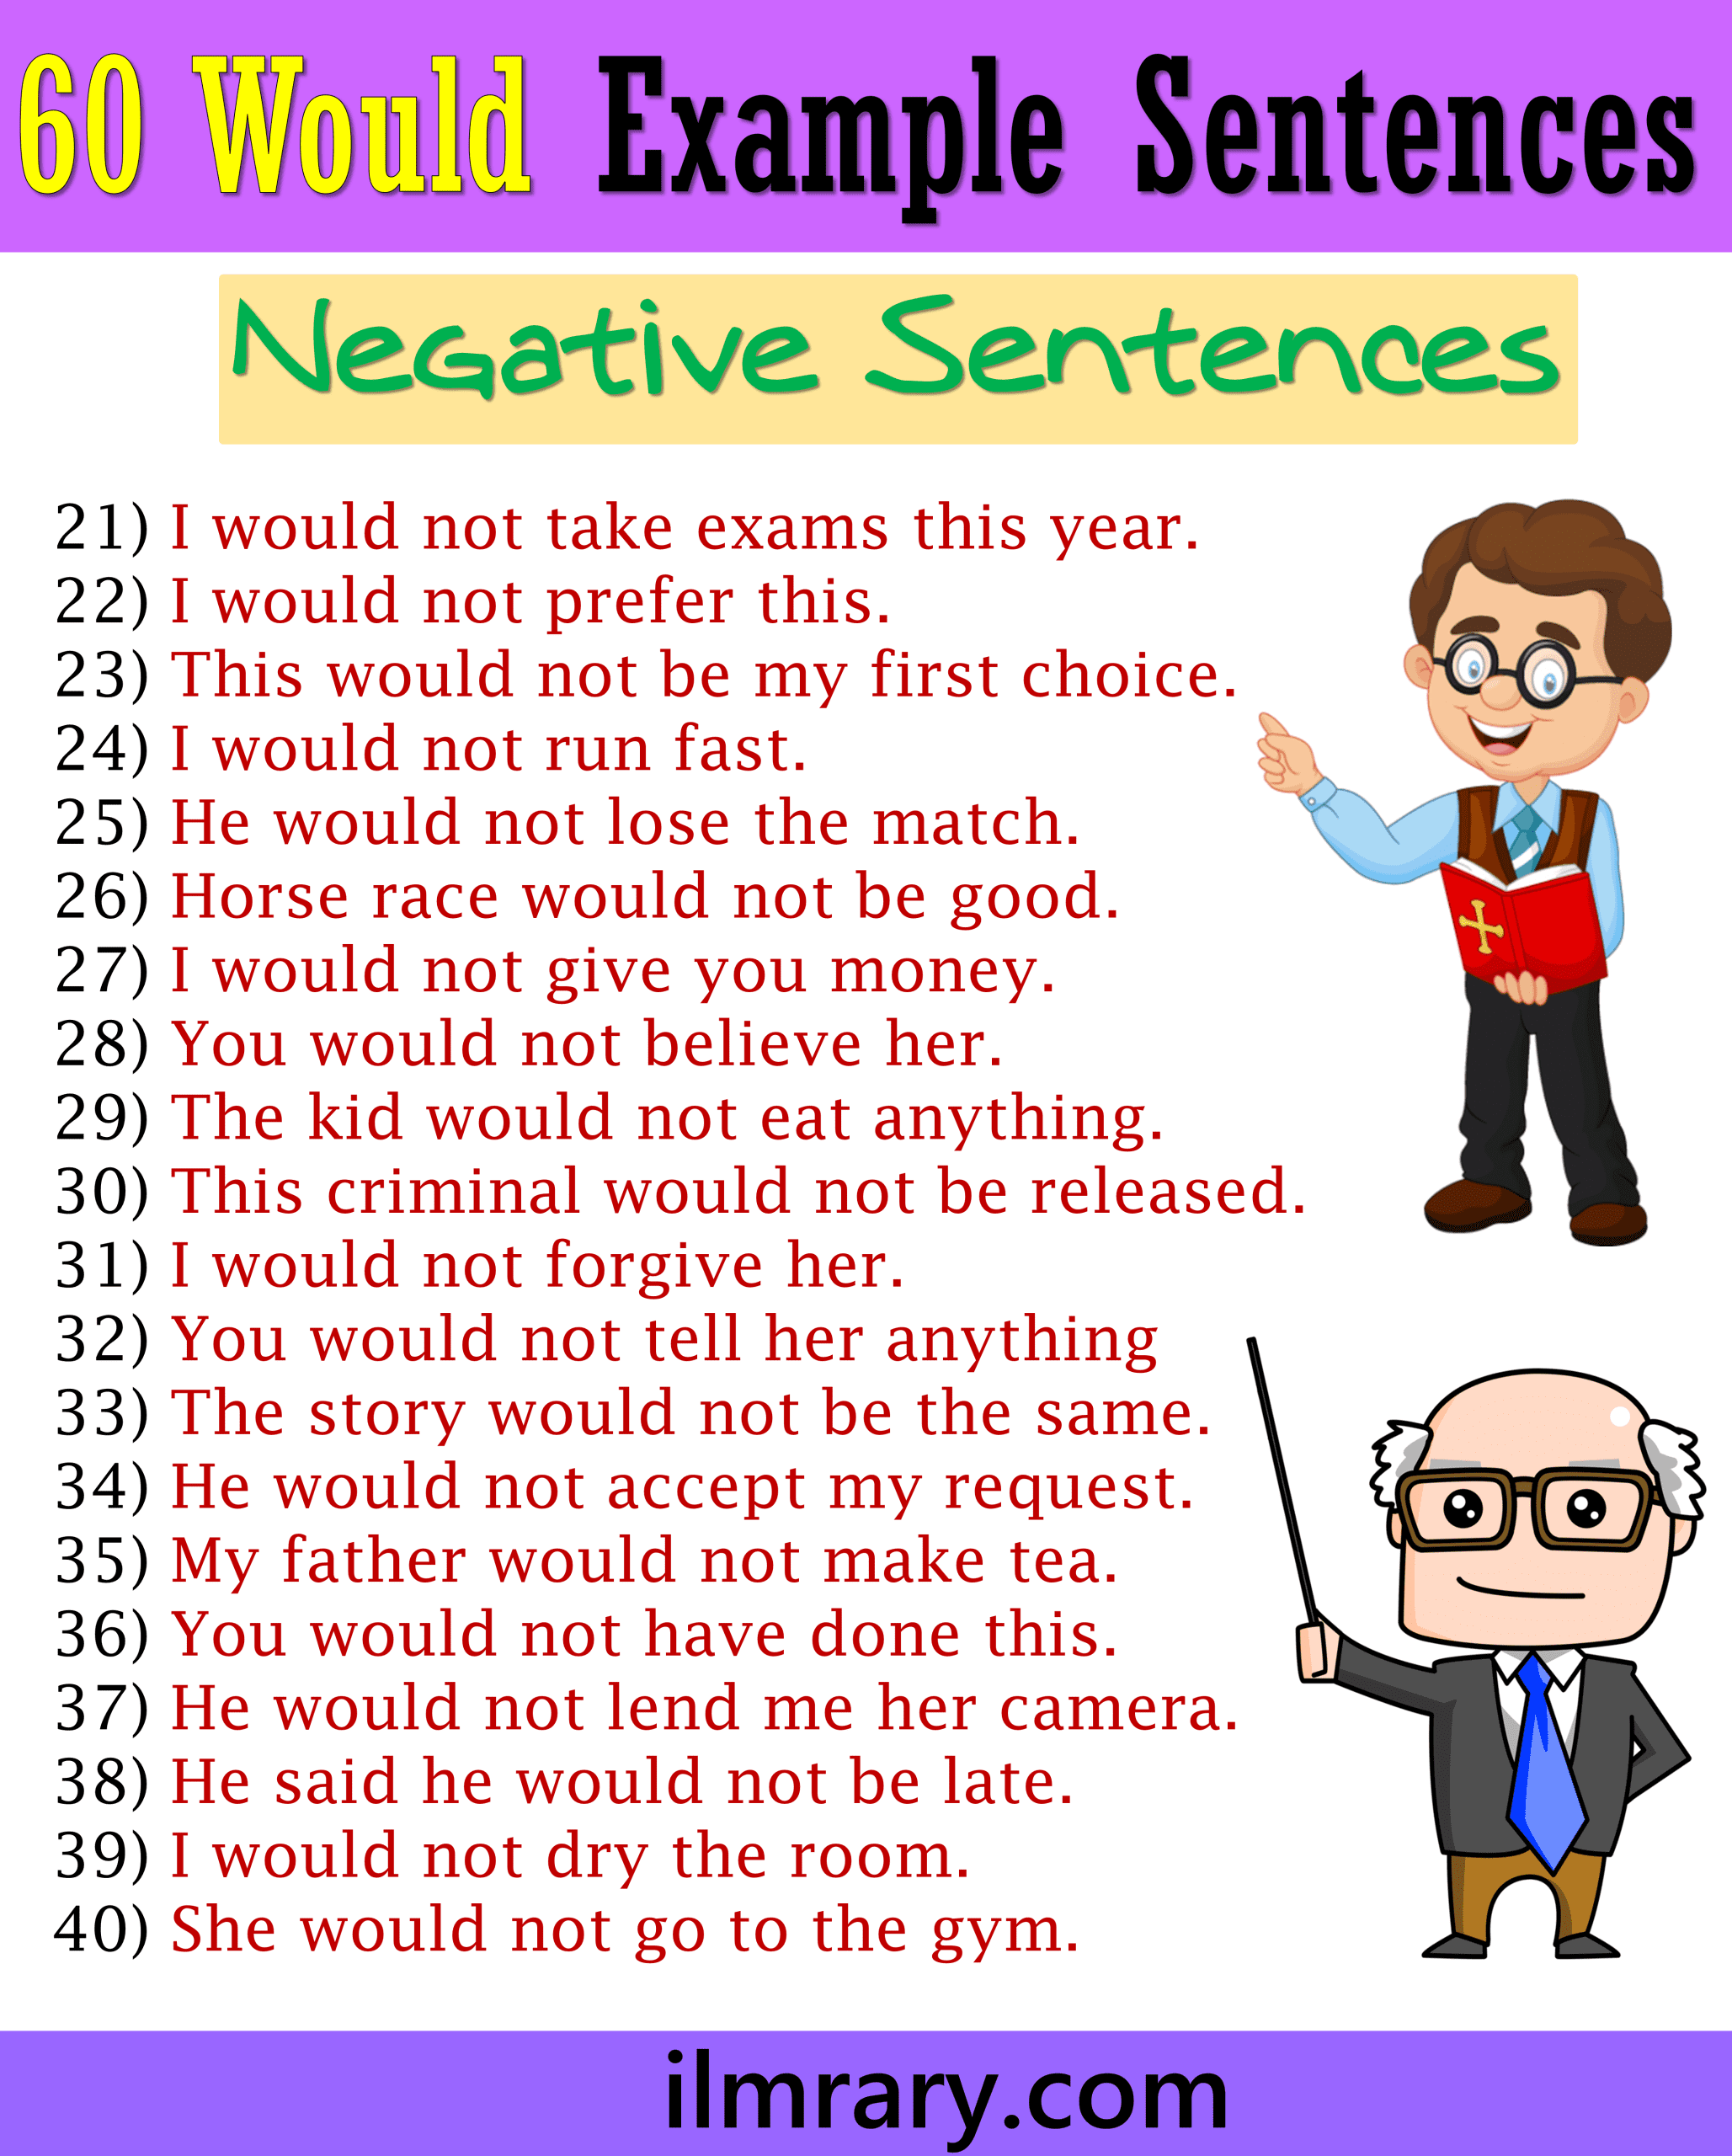 Will Use in Negative Sentences | 60 Examples of Would